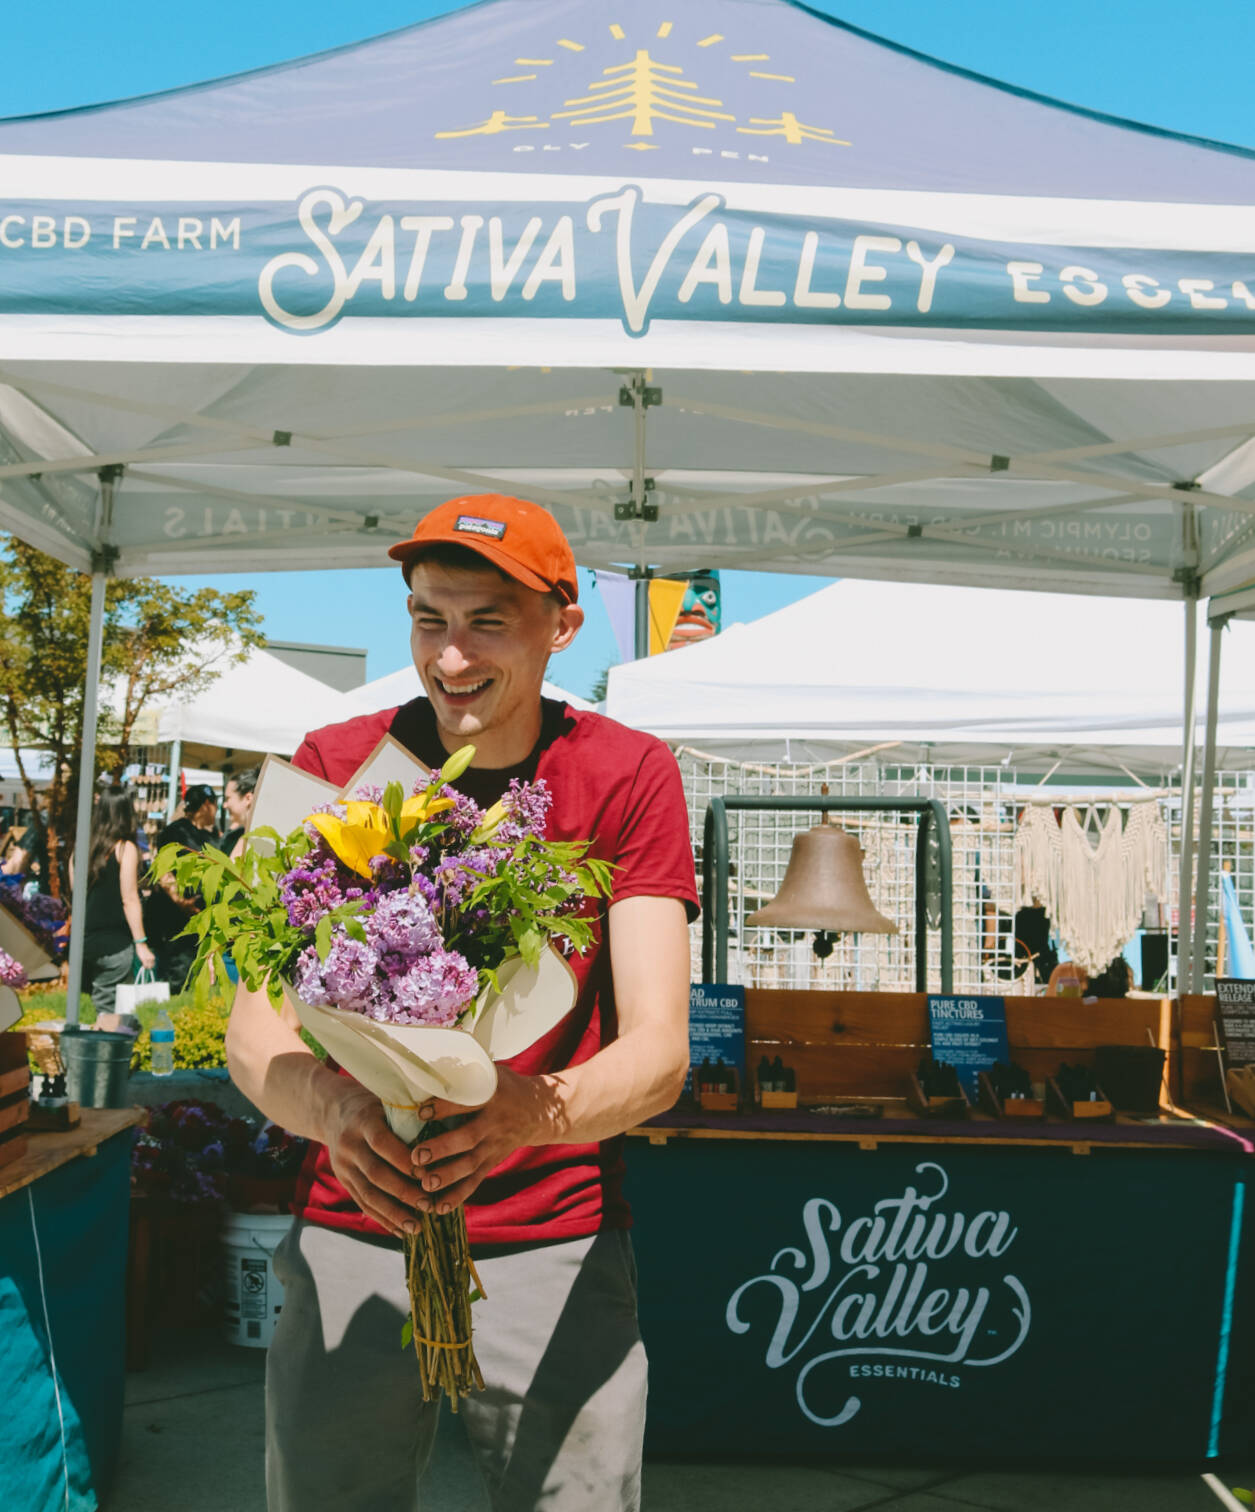 Photo courtesy of Sequim Farmers & Artisans Market/SFAM / Vendors such as Sam Konovalov of Stone Tree Farm and Sativa Valley often go above and beyond in serving the community. Sam currently serves as secretary on the SFAM board.